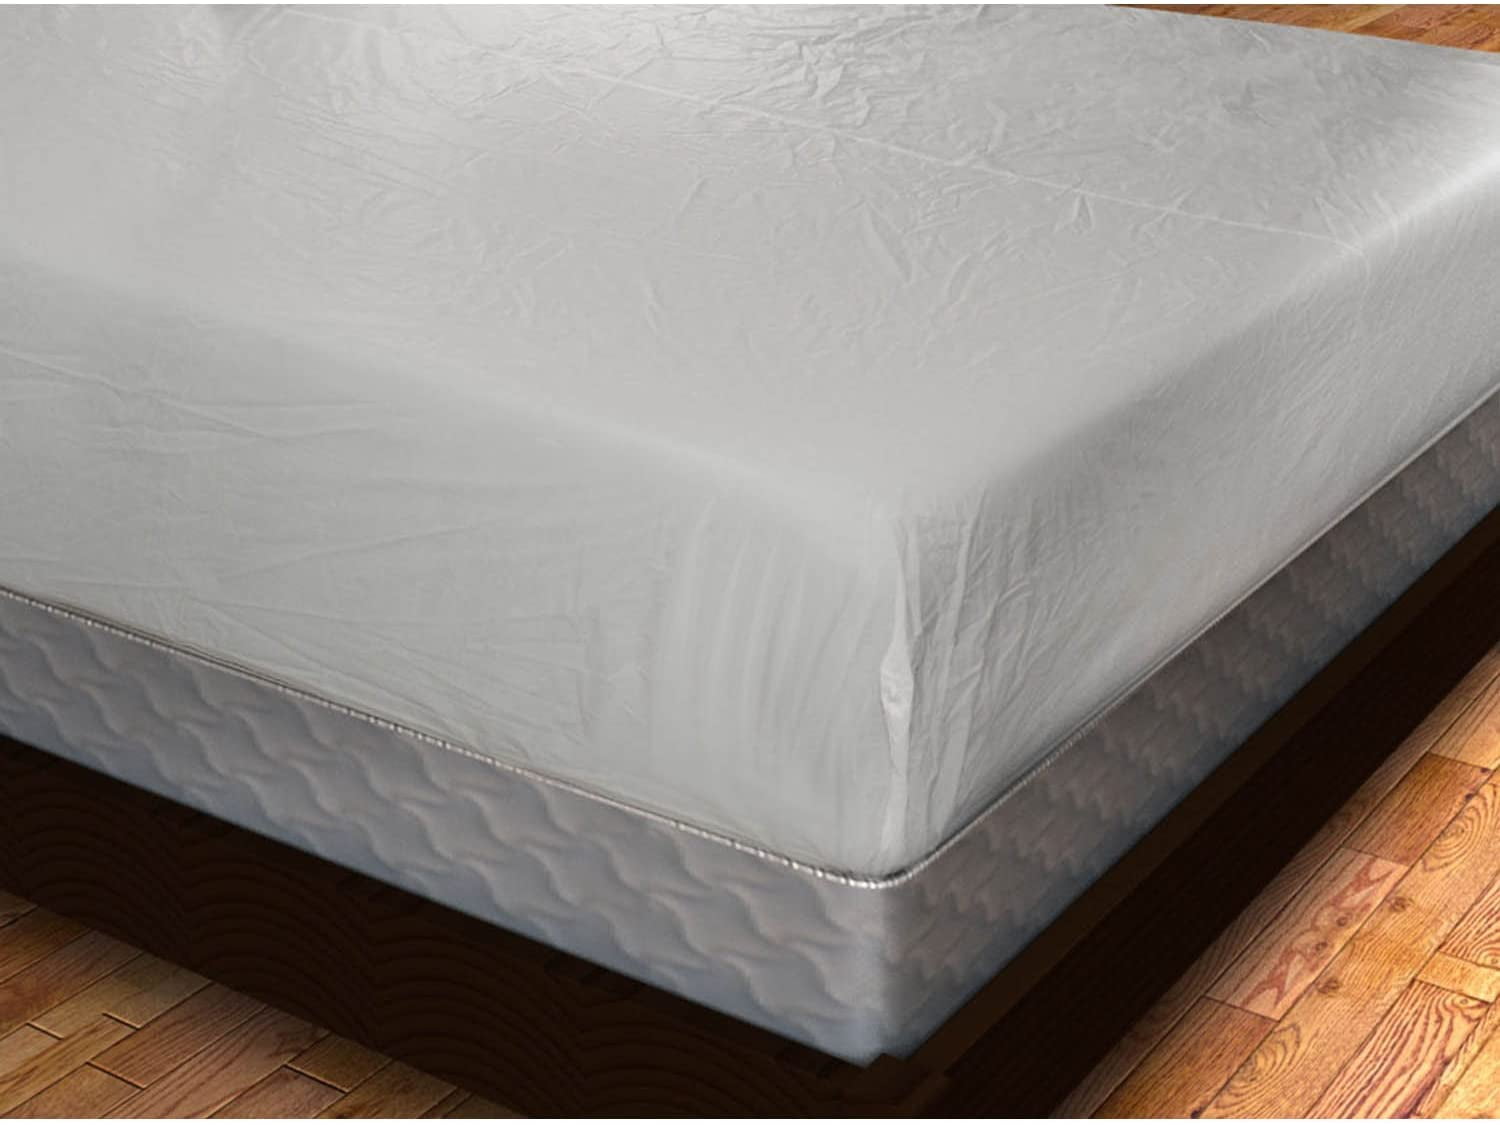 plastic mattress cover queen size bed